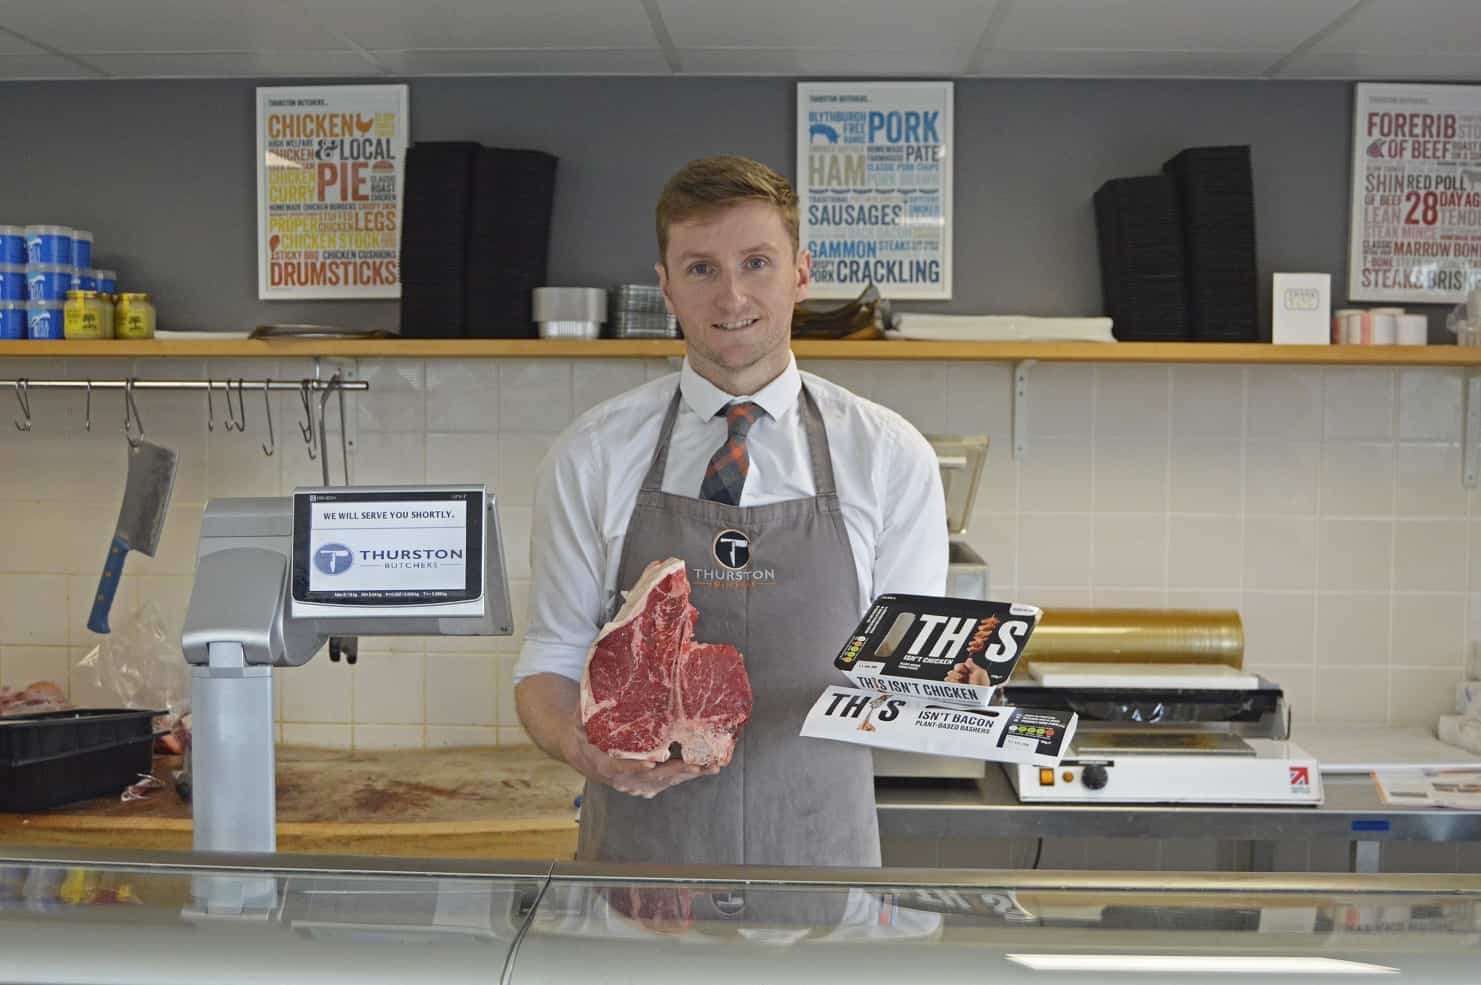 Traditional butchers become first in UK to sell plant-based meat alternatives